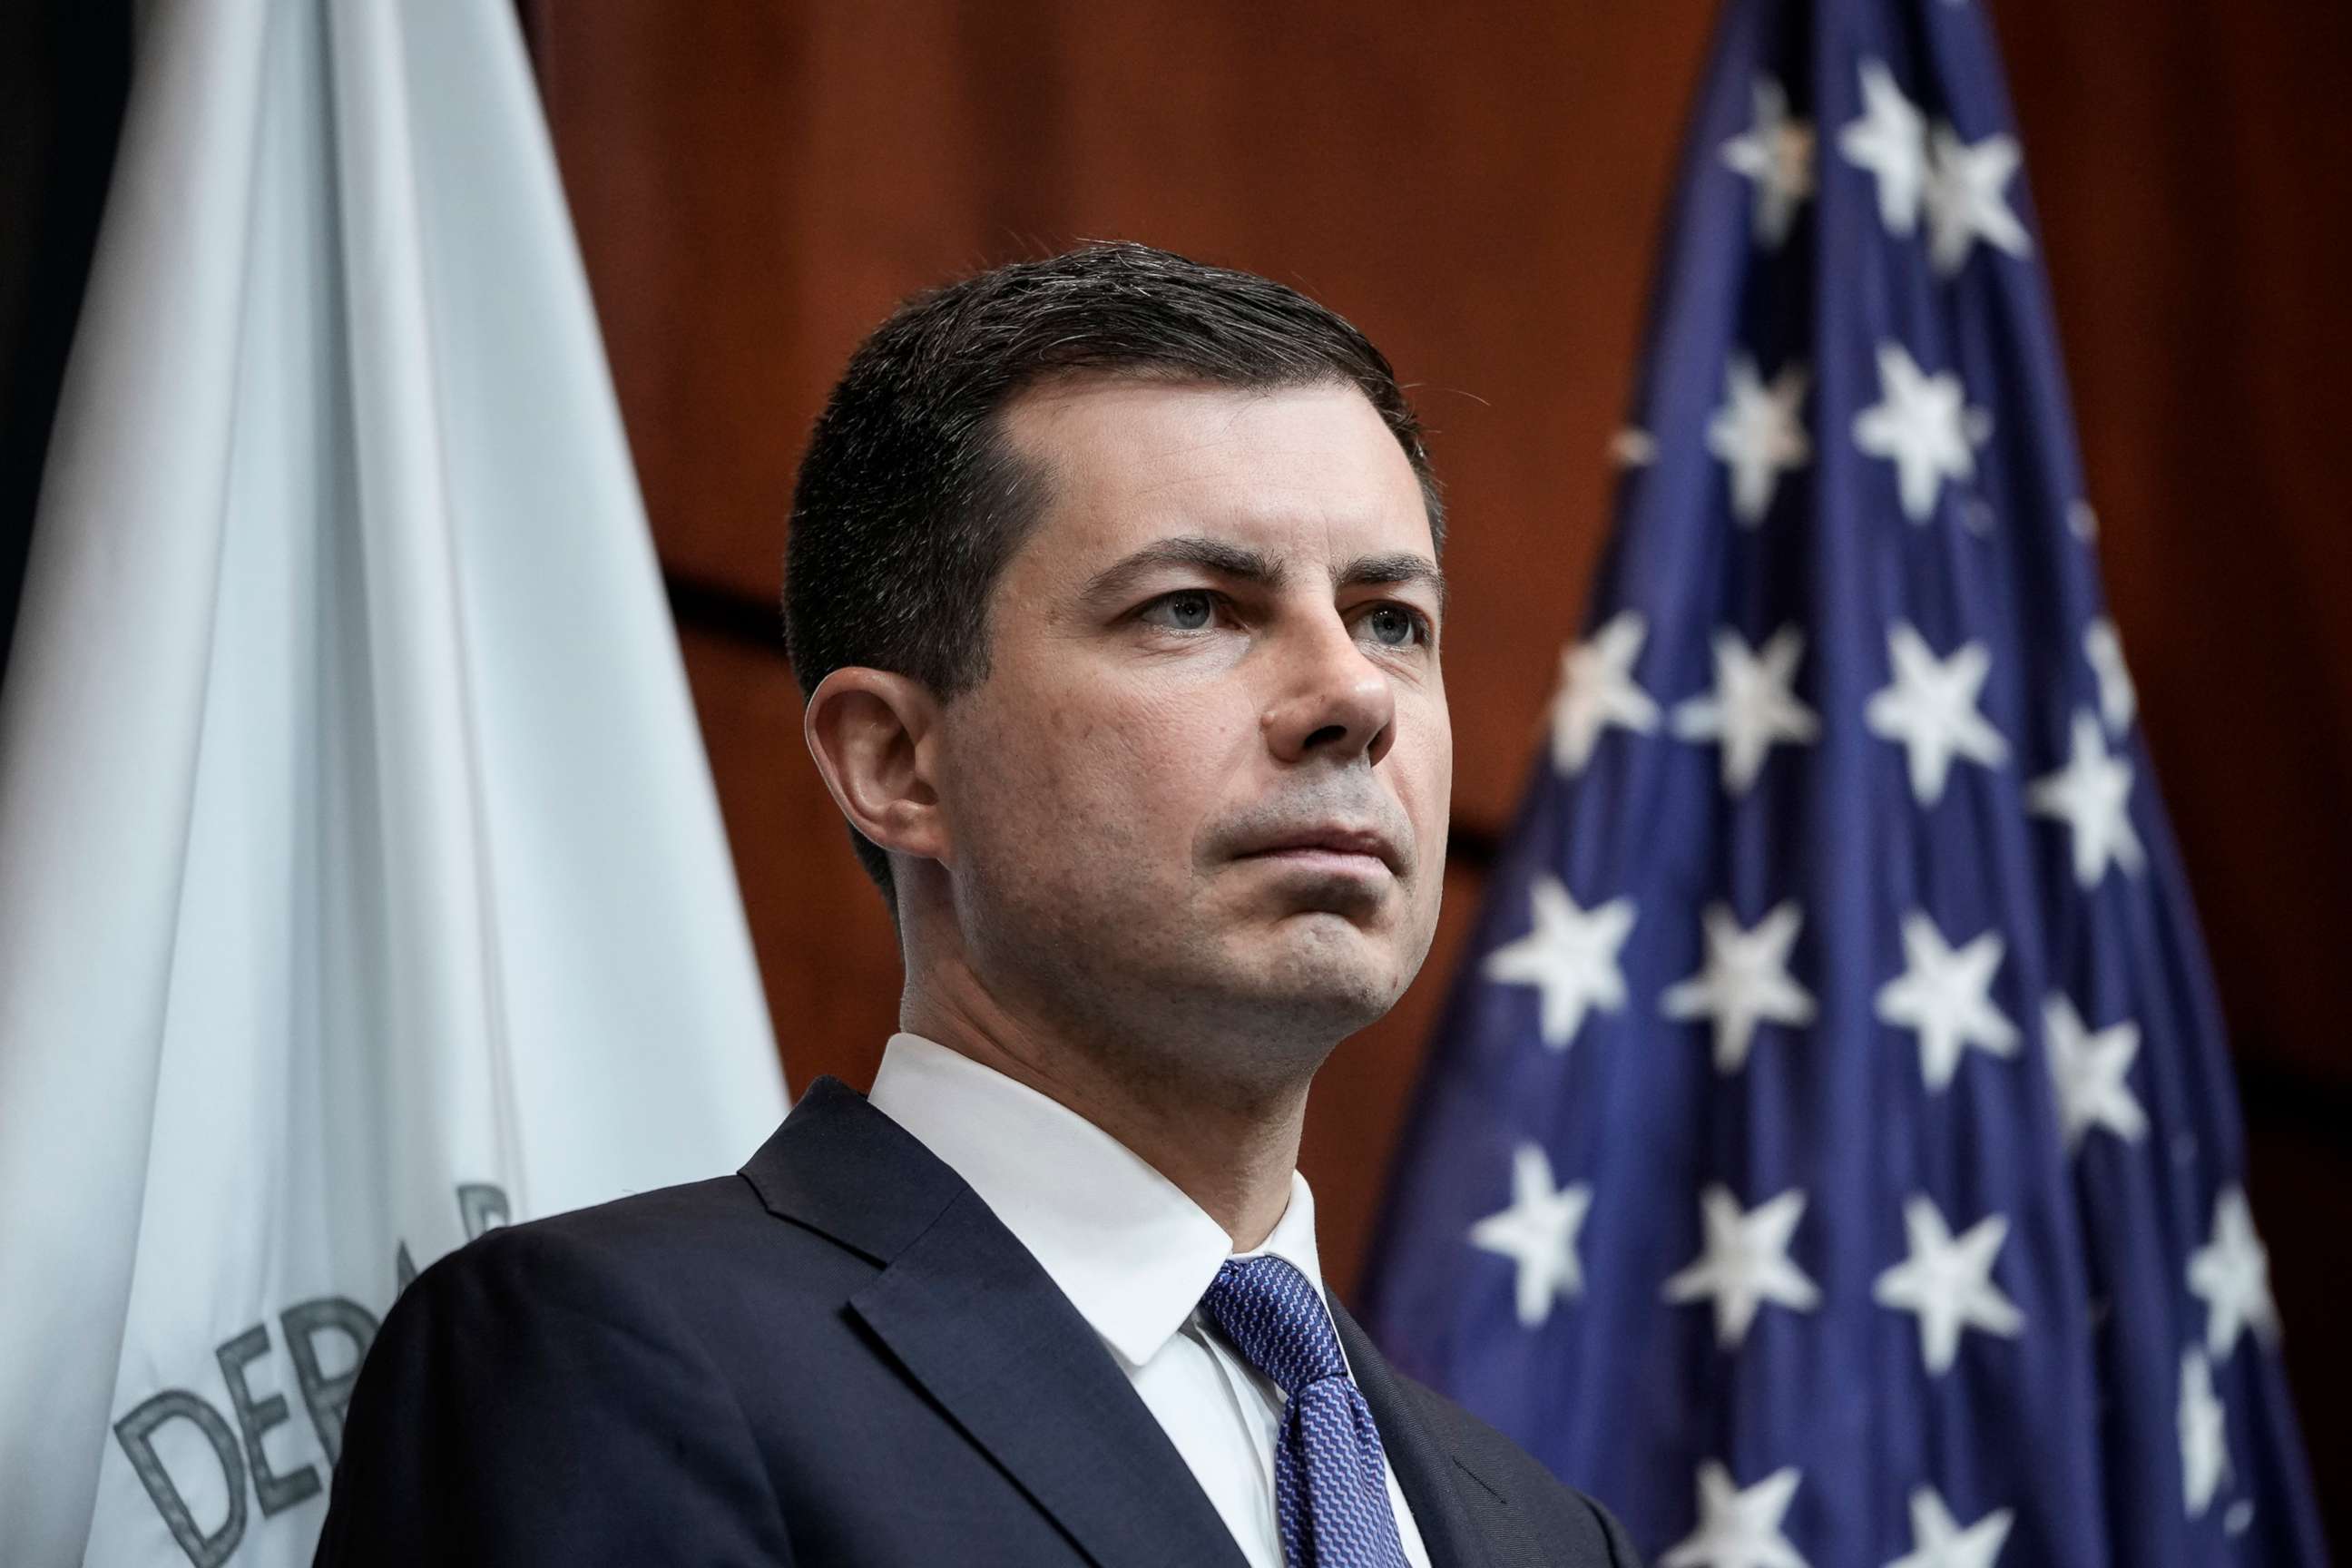 PHOTO: In this April 1, 2022 file photo Secretary of Transportation Pete Buttigieg speaks during an event about fuel economy standards at the headquarters of the Department of Transportation in Washington, D.C.